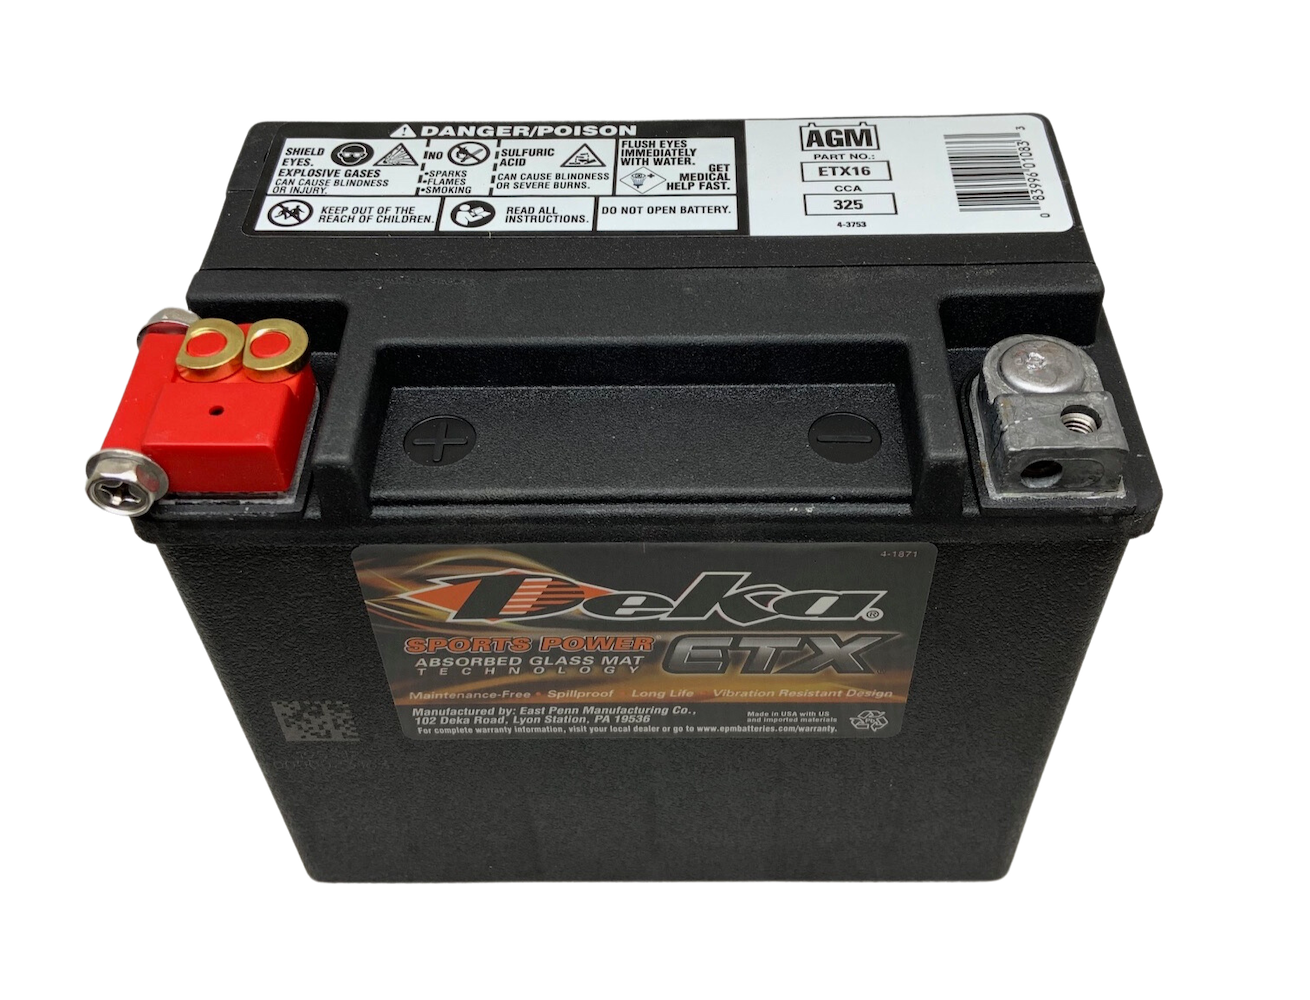 Is this a good replacement battery for a yamaha fx wave runner